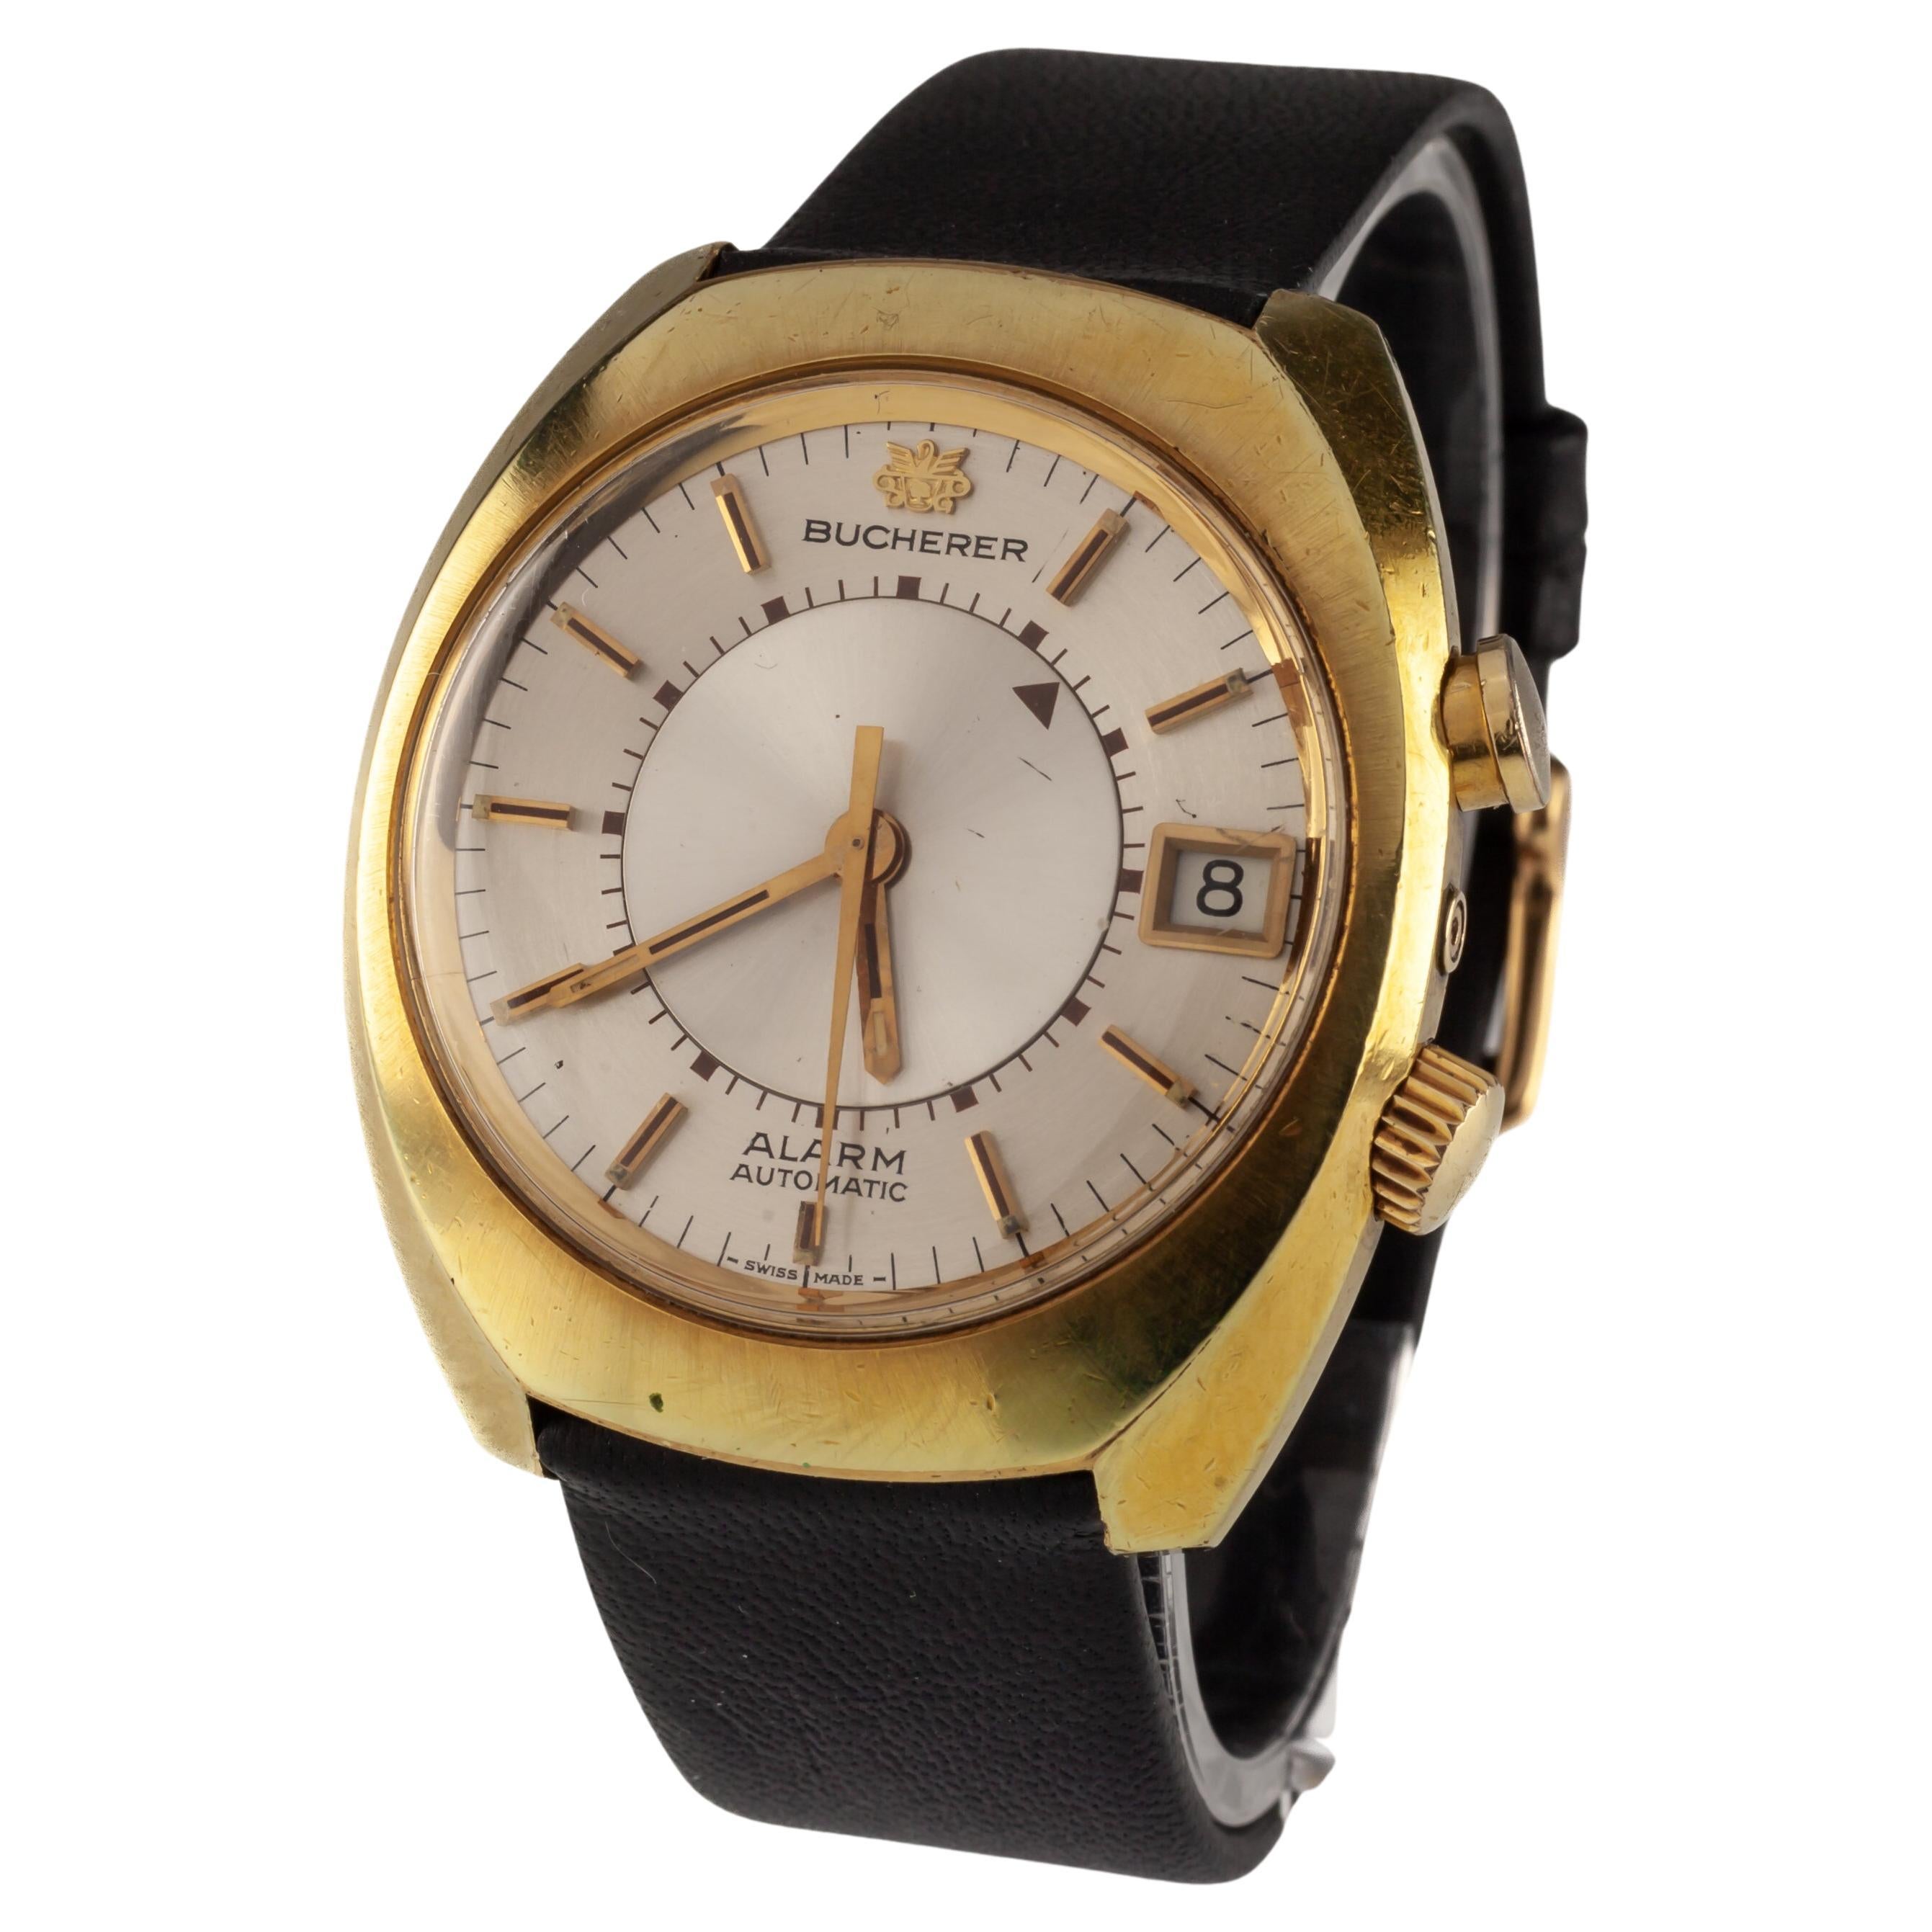 Bucherer Gold-Plated Alarm Watch Automatic "Memomatic" w/ Leather Band 2980 Date For Sale